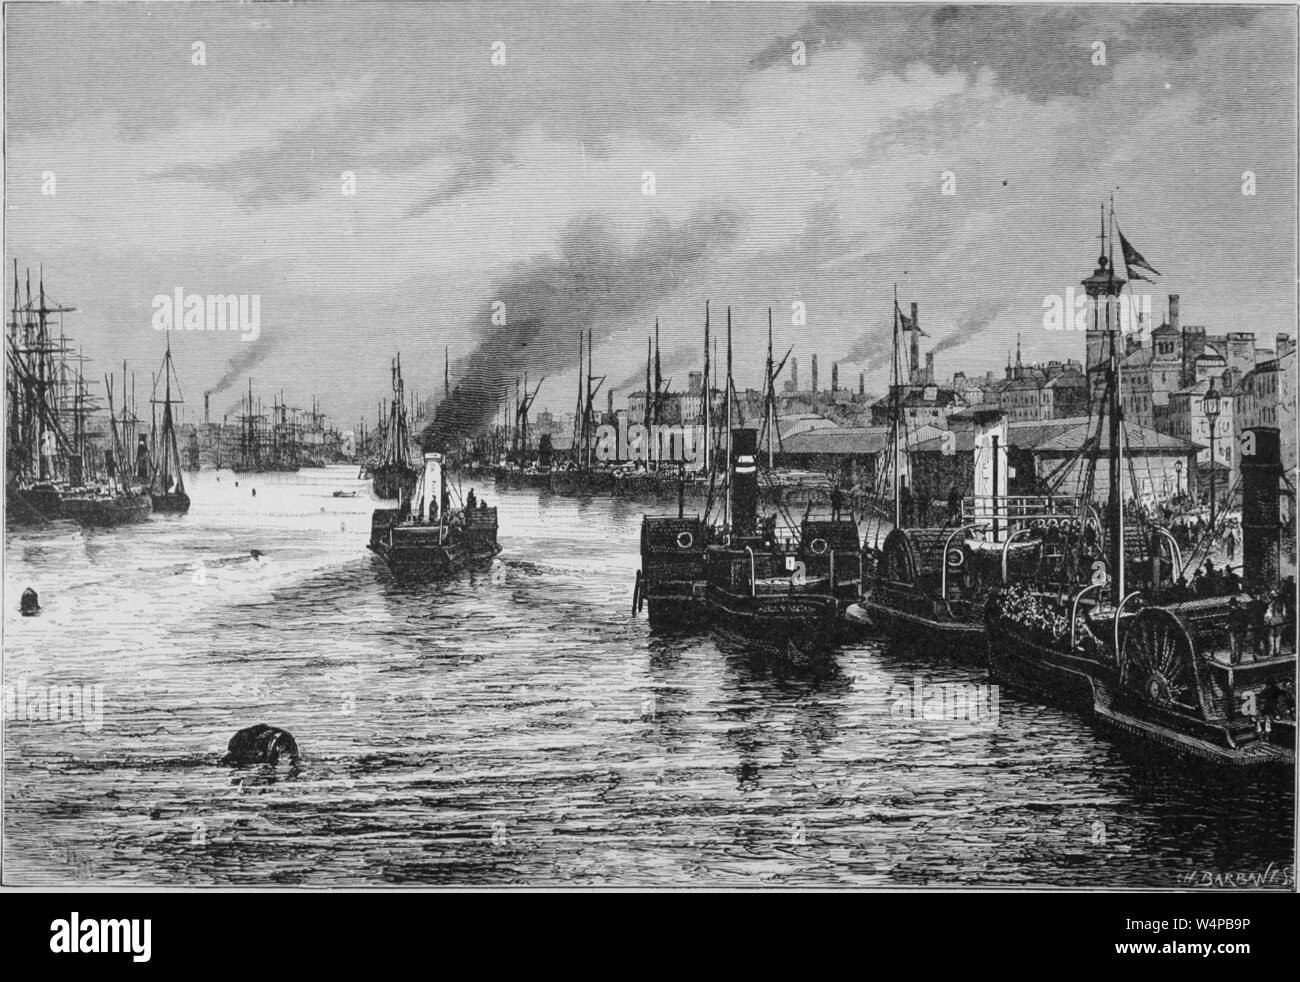 Engraving of the Port of Glasgow, Scotland, from the book 'The earth and its inhabitants' by Elisee Reclus, 1881. Courtesy Internet Archive. () Stock Photo